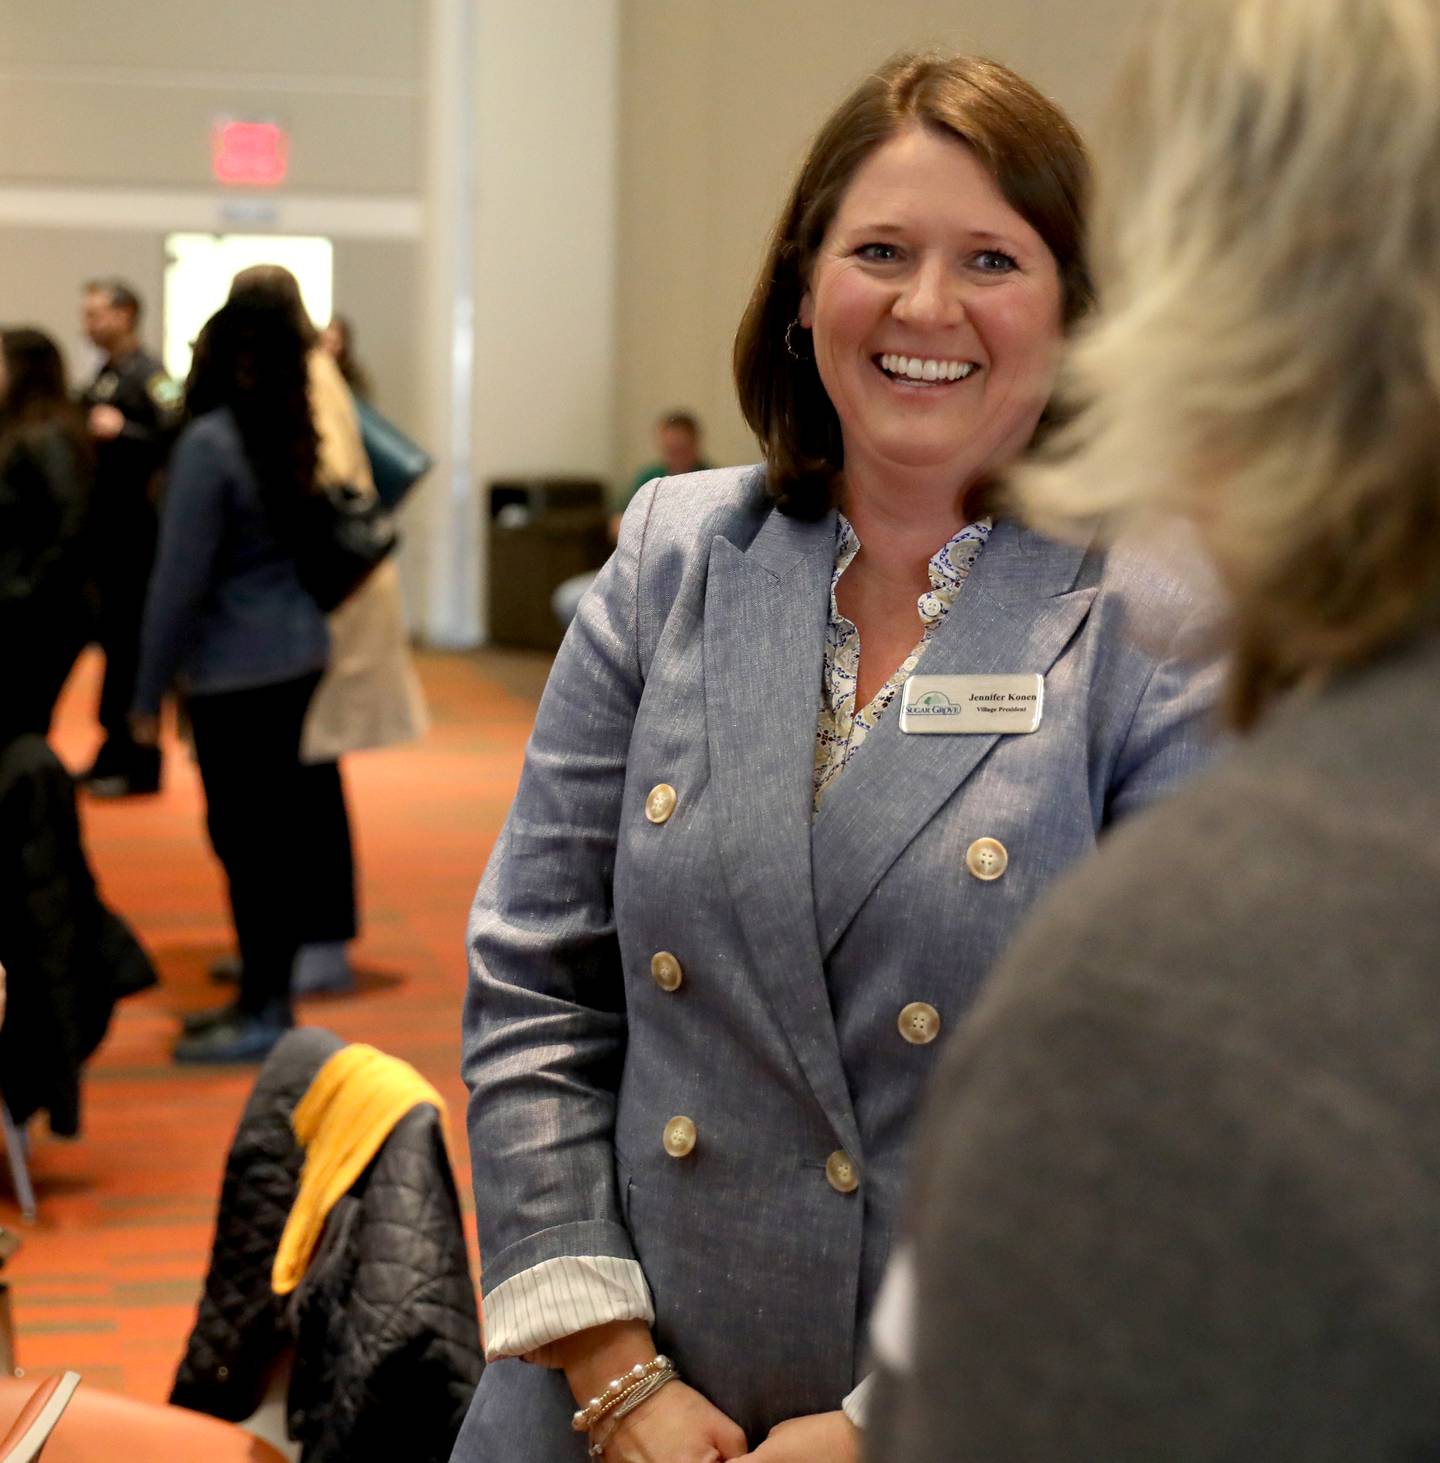 Sugar Grove Village President Jennifer Konen chats with community members following the State of the Village address at Waubonsee Community College in Sugar Grove on Tuesday, Feb. 28, 2023.